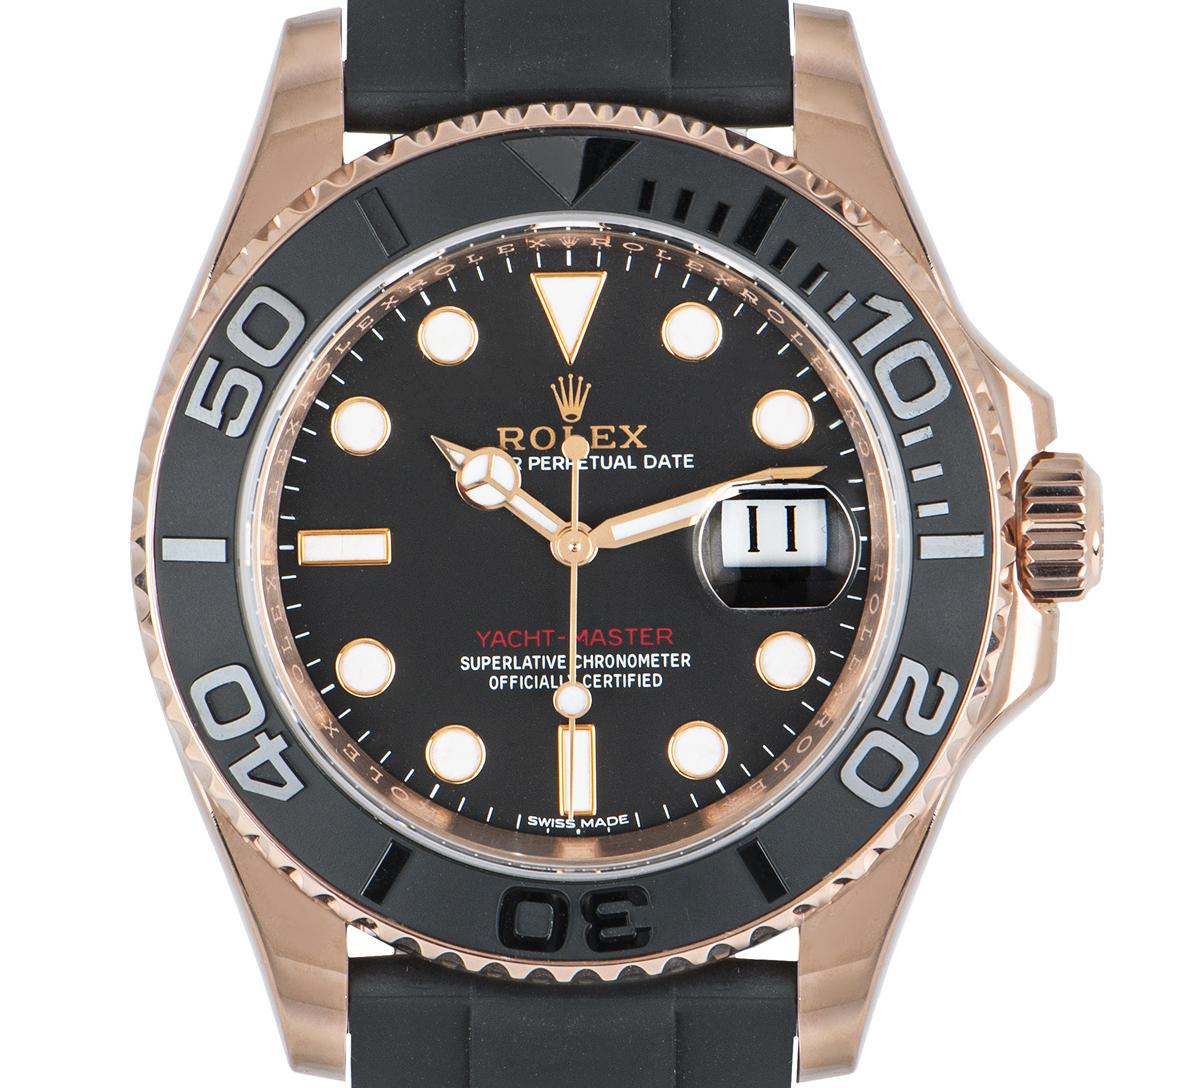 A mens 40mm Yacht-Master in rose gold by Rolex. Featuring an intense black dial with the date and a matt black ceramic bidirectional rotatable bezel with raised 60-minute numerals and graduations.

The black Oysterflex bracelet comes with a folding